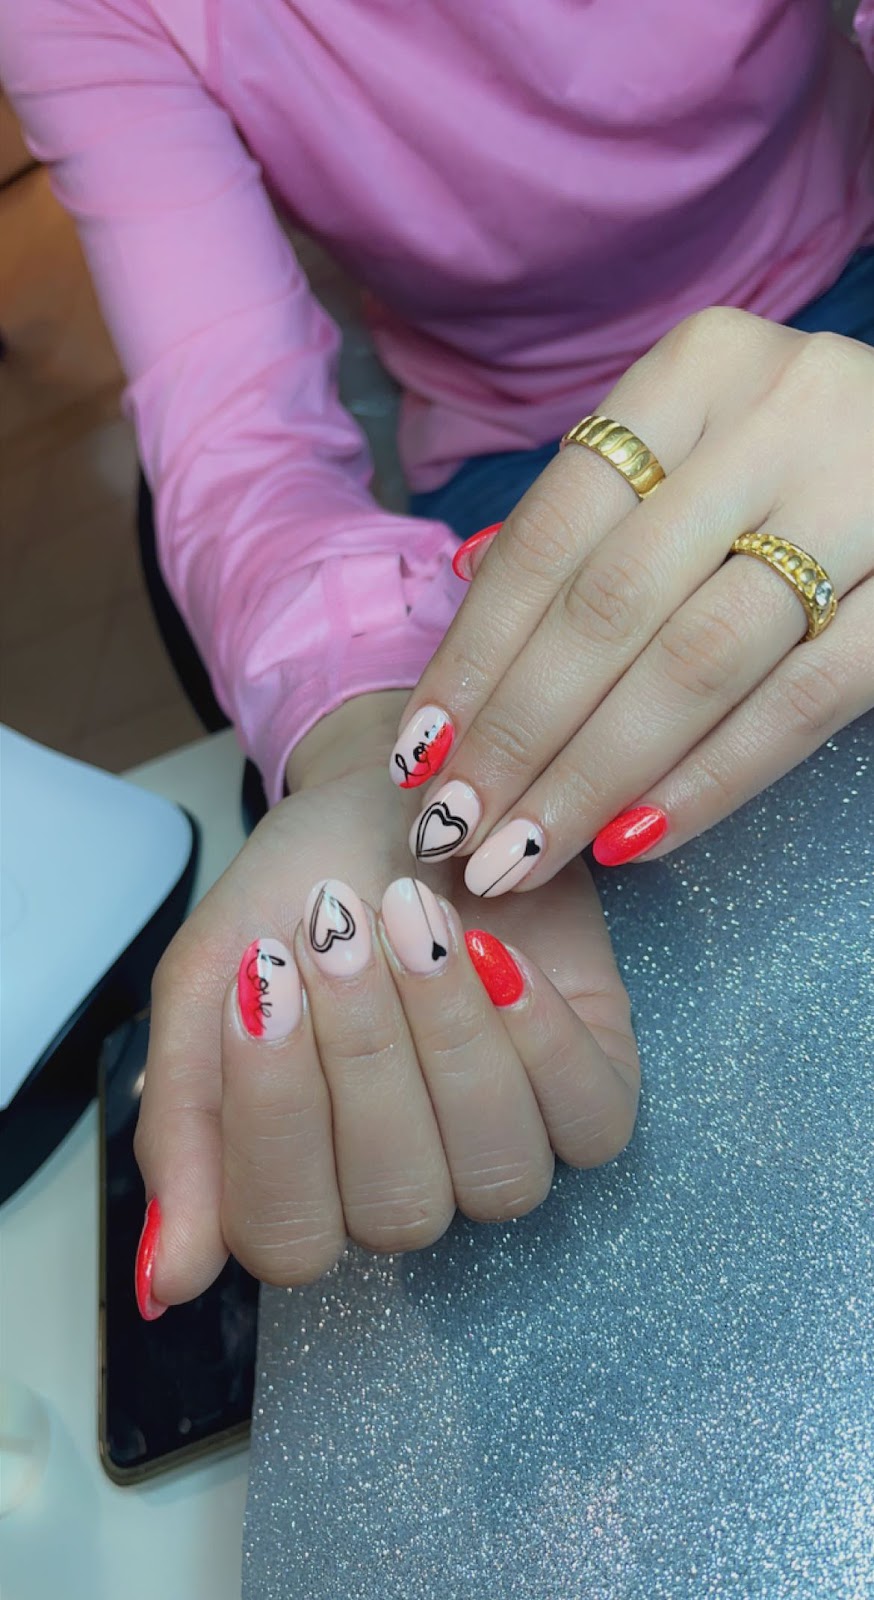 Saman Styles Nails and Spa | point of interest | 56 Petunias Rd, Brampton, ON L6V 3G8, Canada | 6478794370 OR +1 647-879-4370